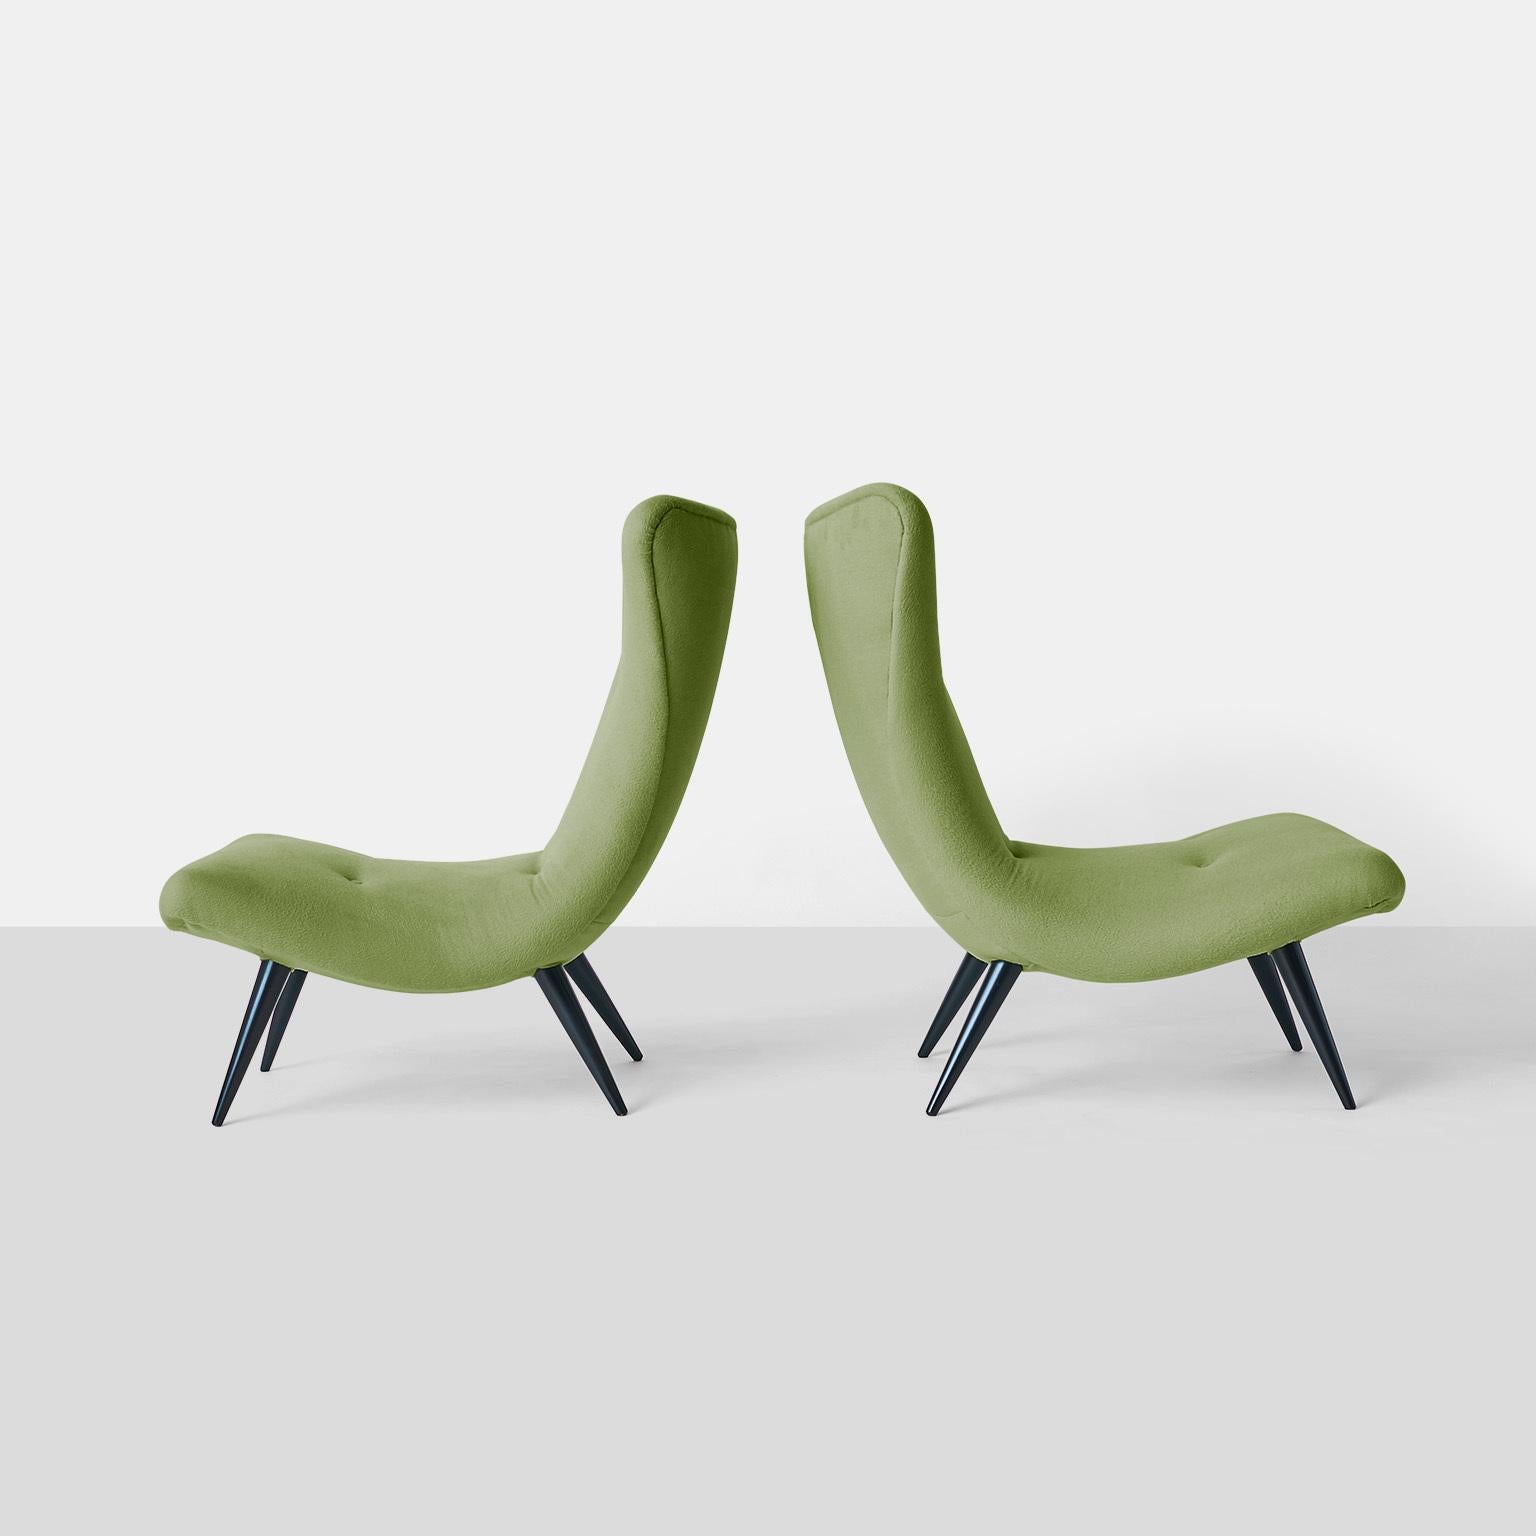 Pair of scoop chairs by Karpen
A pair of modern scoop chairs by The Karpen of California Company with ebonized stiletto legs. Completely restored in a luxurious Sandra Jordan Prima Alpaca fabric in color Cucumber.
USA, circa 1950s.